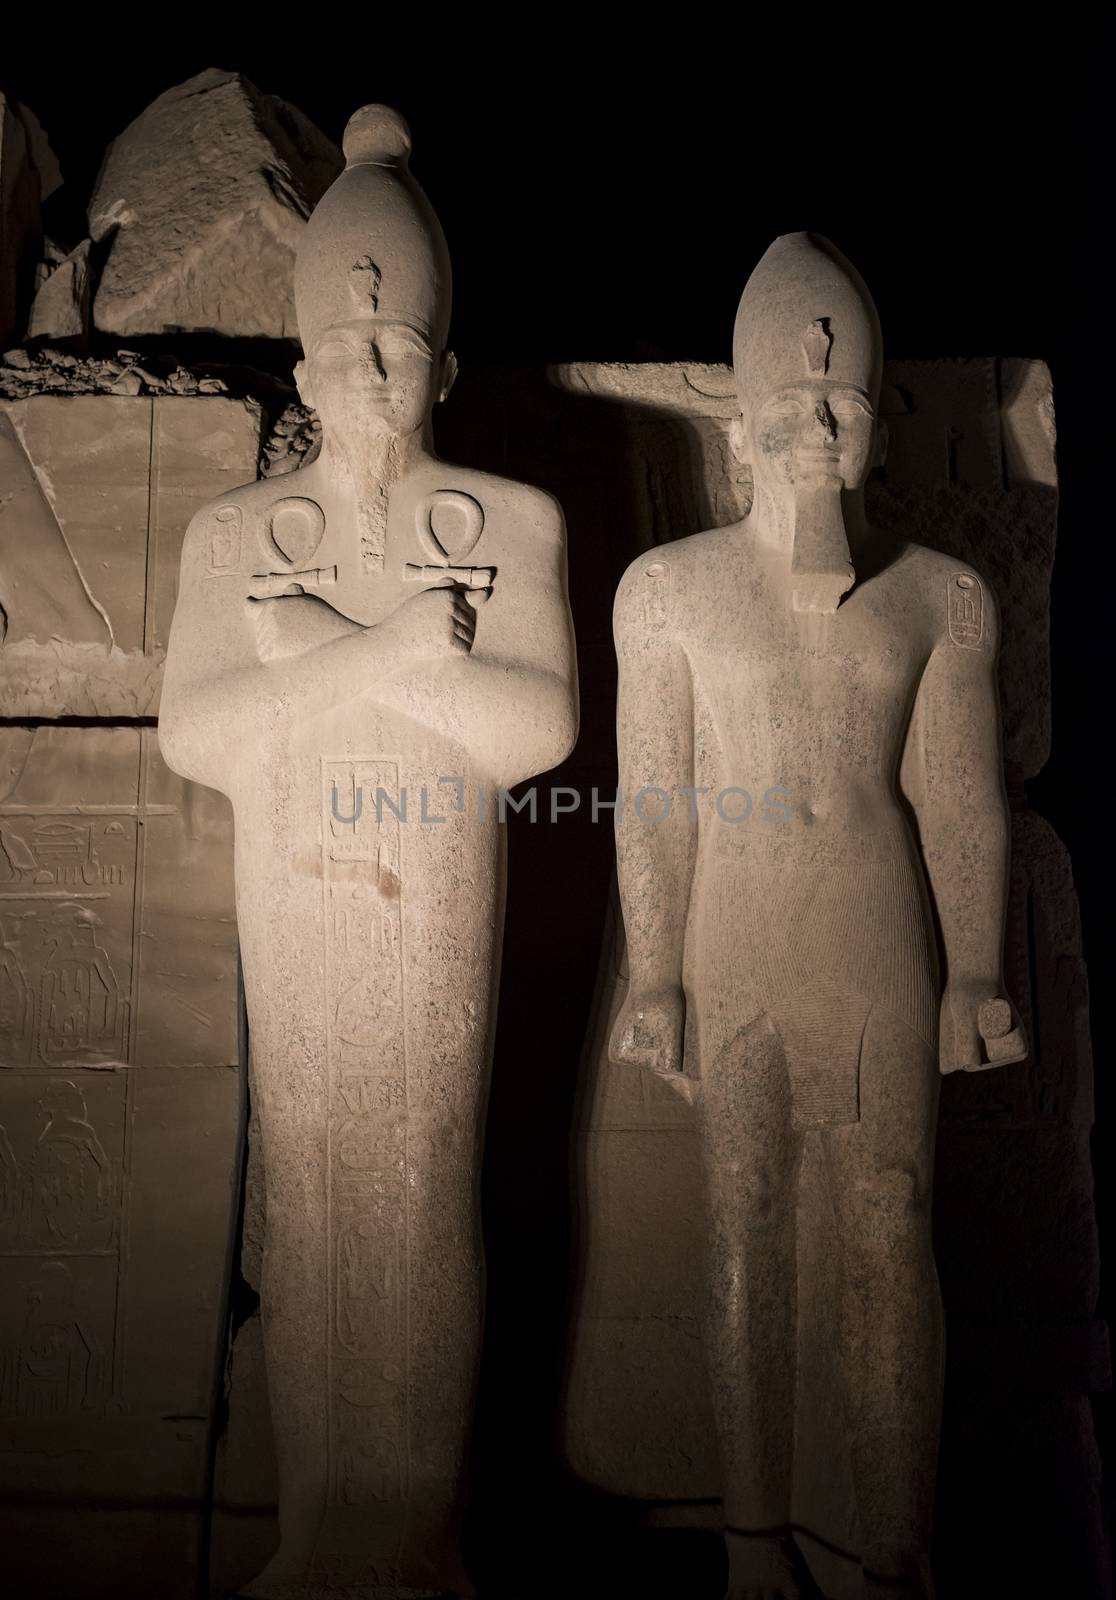 Tall stone ancient egyptian statues at Karnak Temple in Luxor lit up during night on black sky background